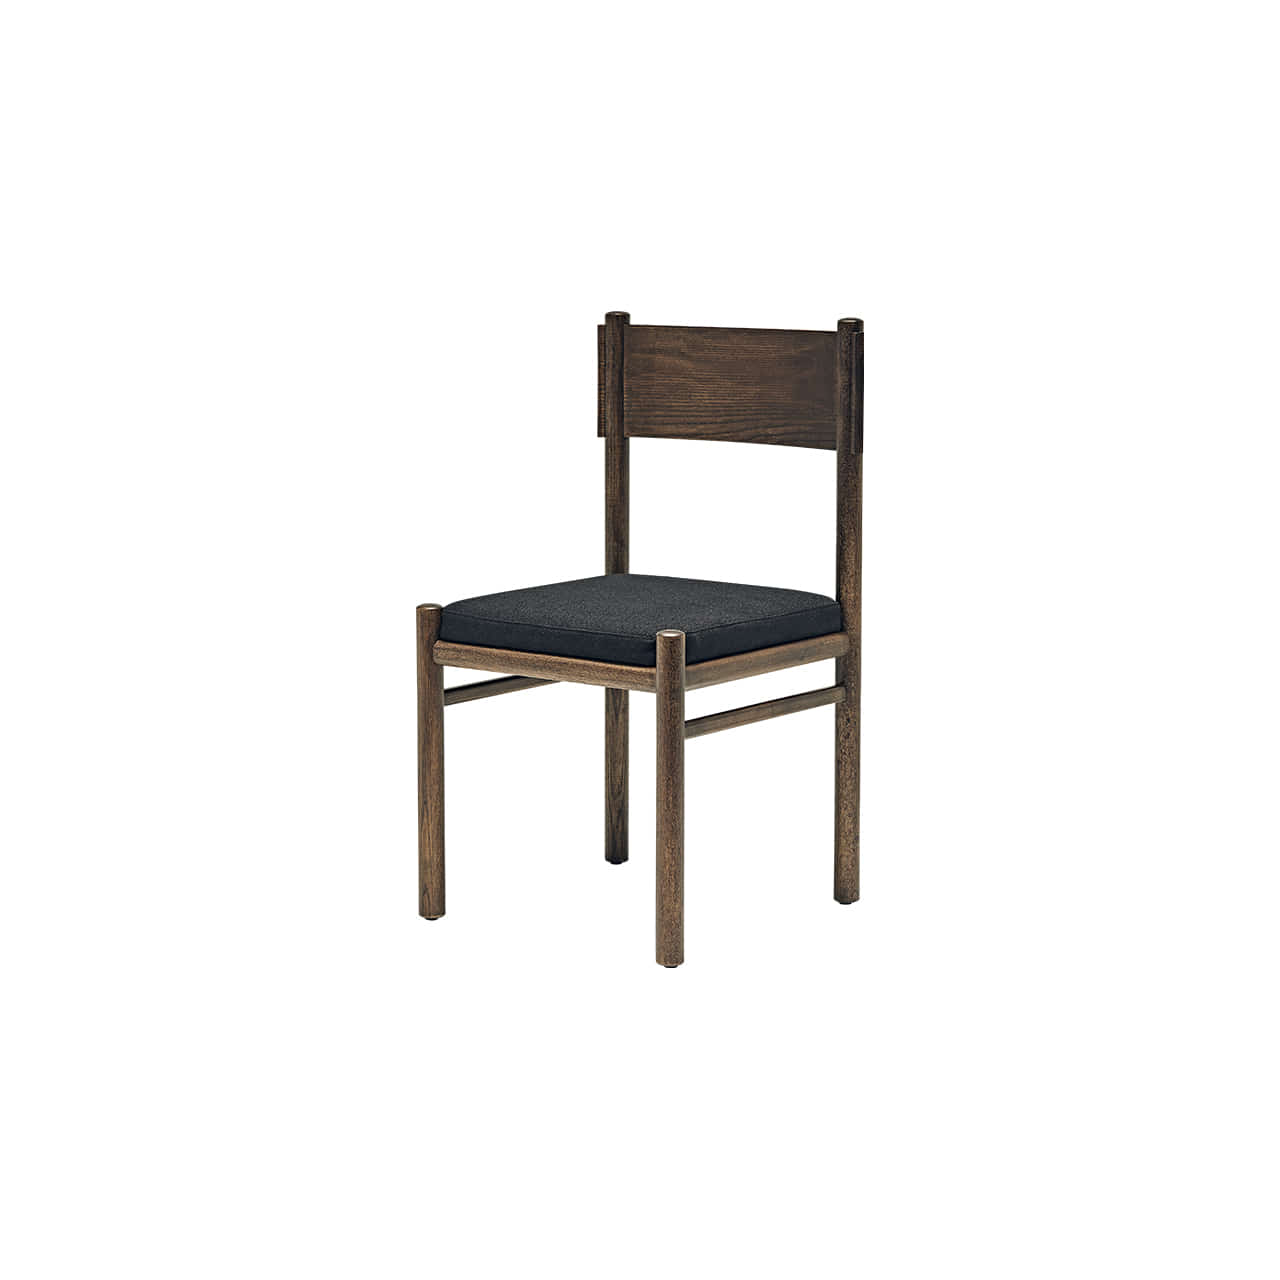 LINE DINING CHAIR